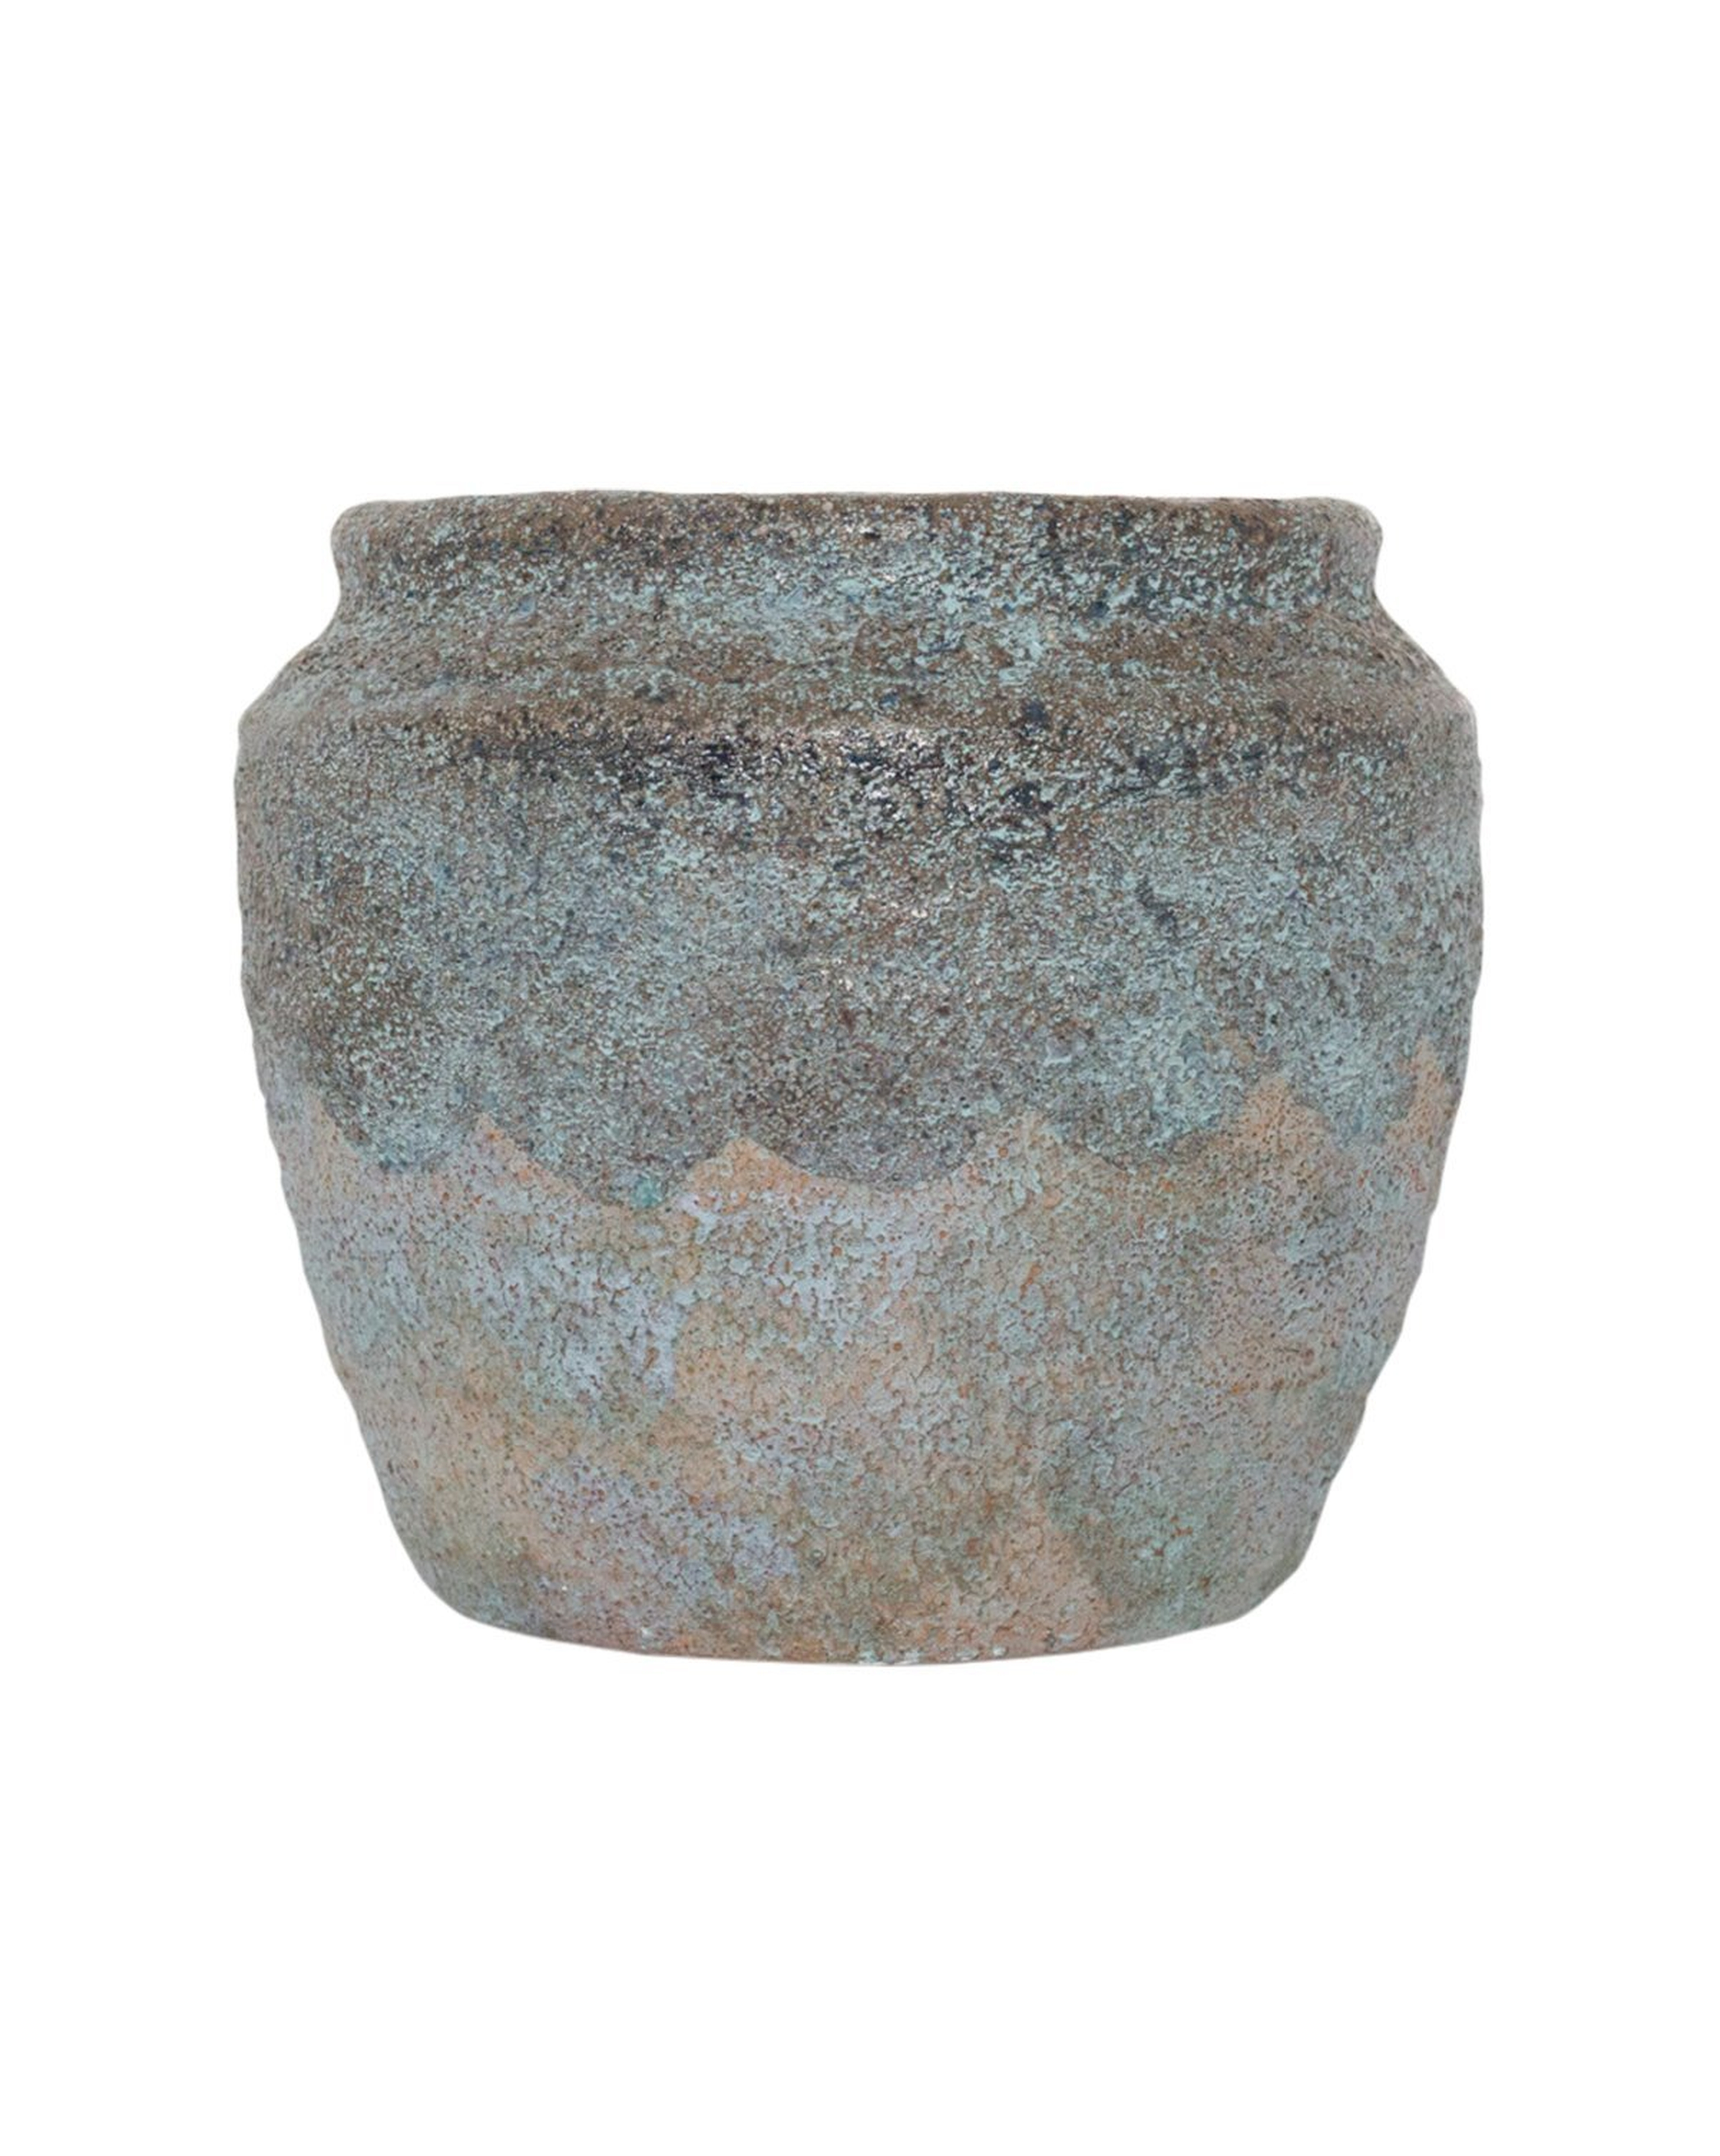 EARTHY TEXTURED POT - McGee & Co.